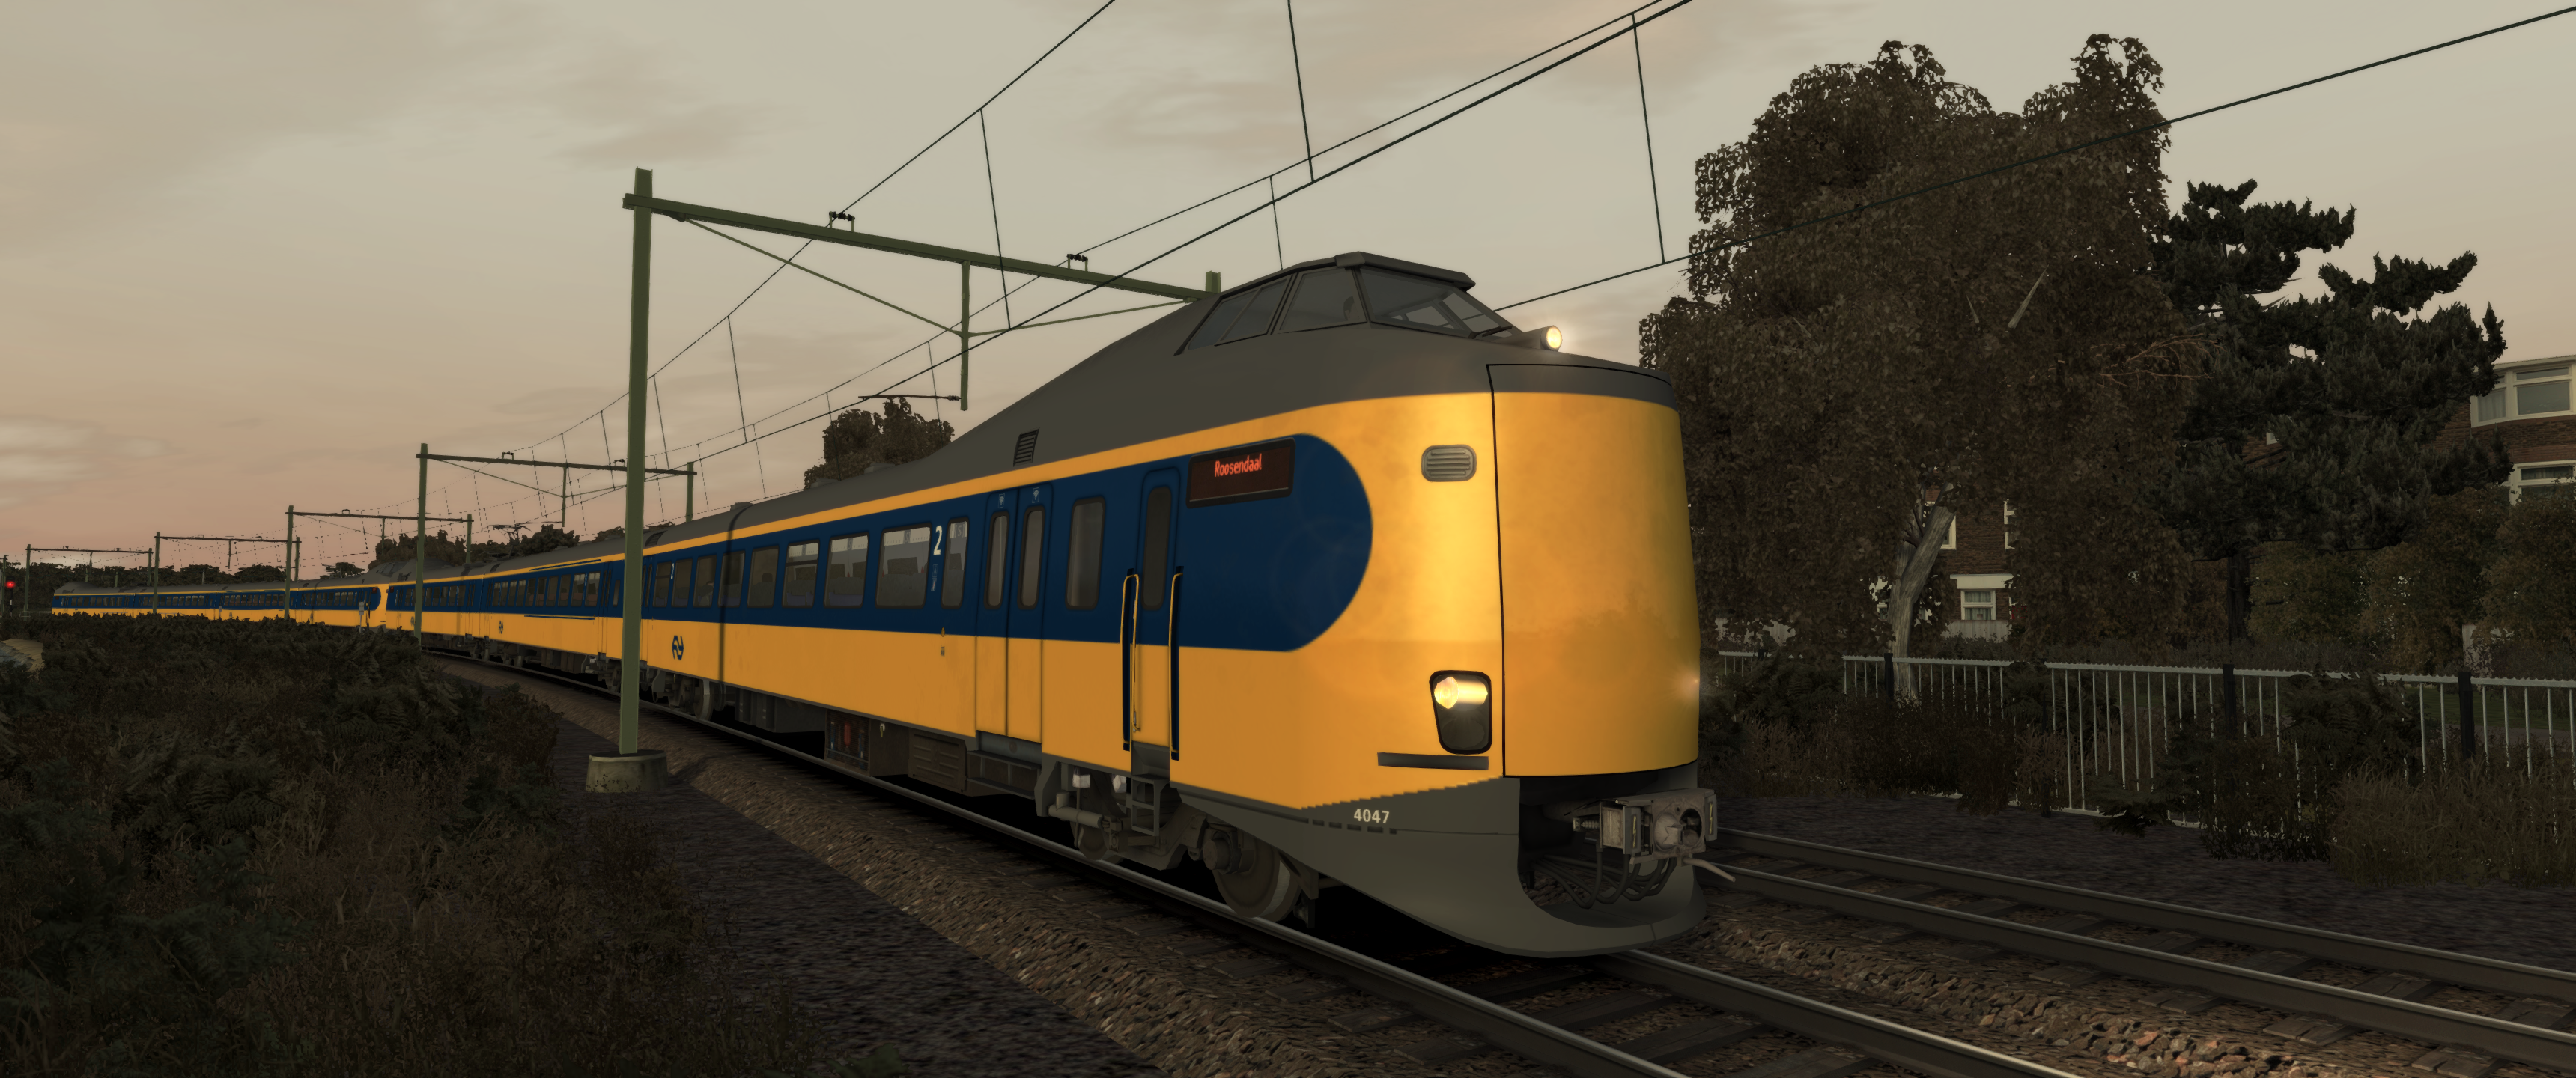 More information about "[SP] IC 3667 - Zwolle to 's Hertogenbosch"